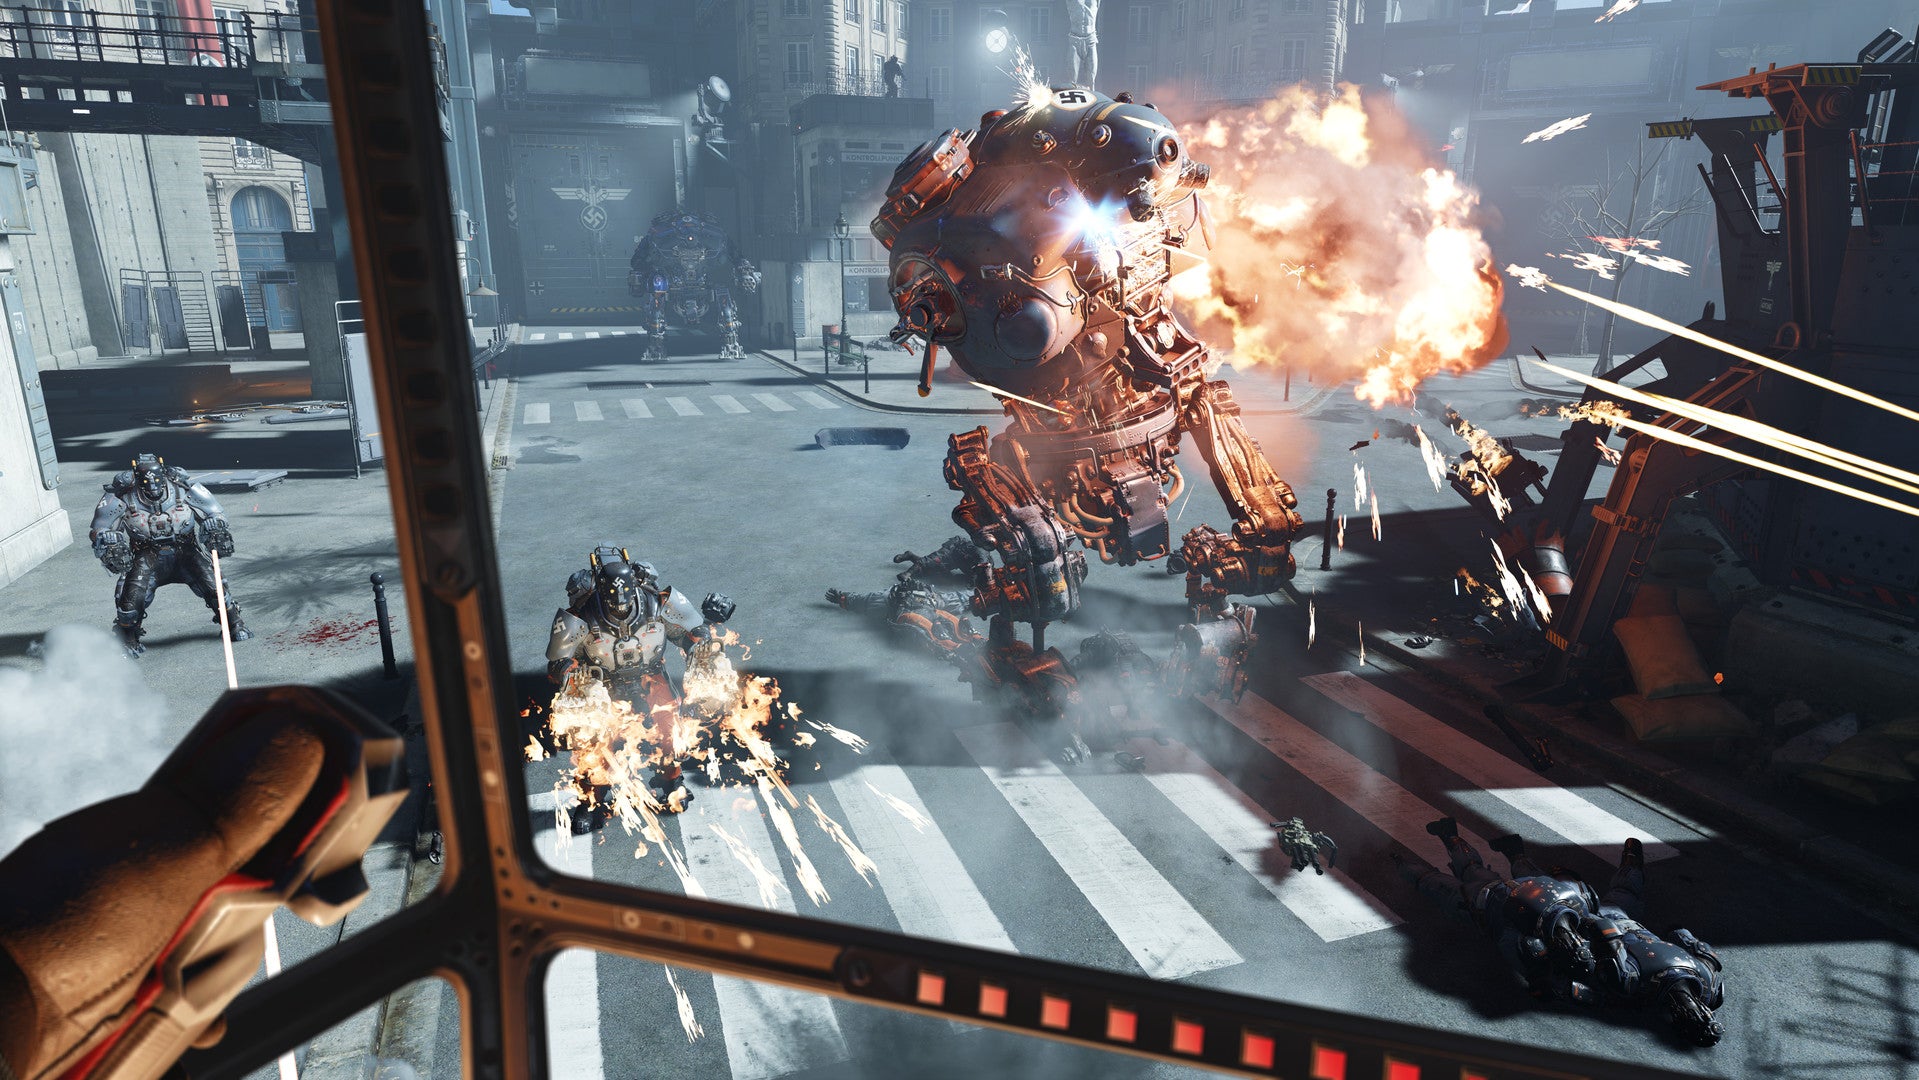 Image for Wolfenstein: Youngblood - inspired by The Goonies, and yep, Nazis are bad